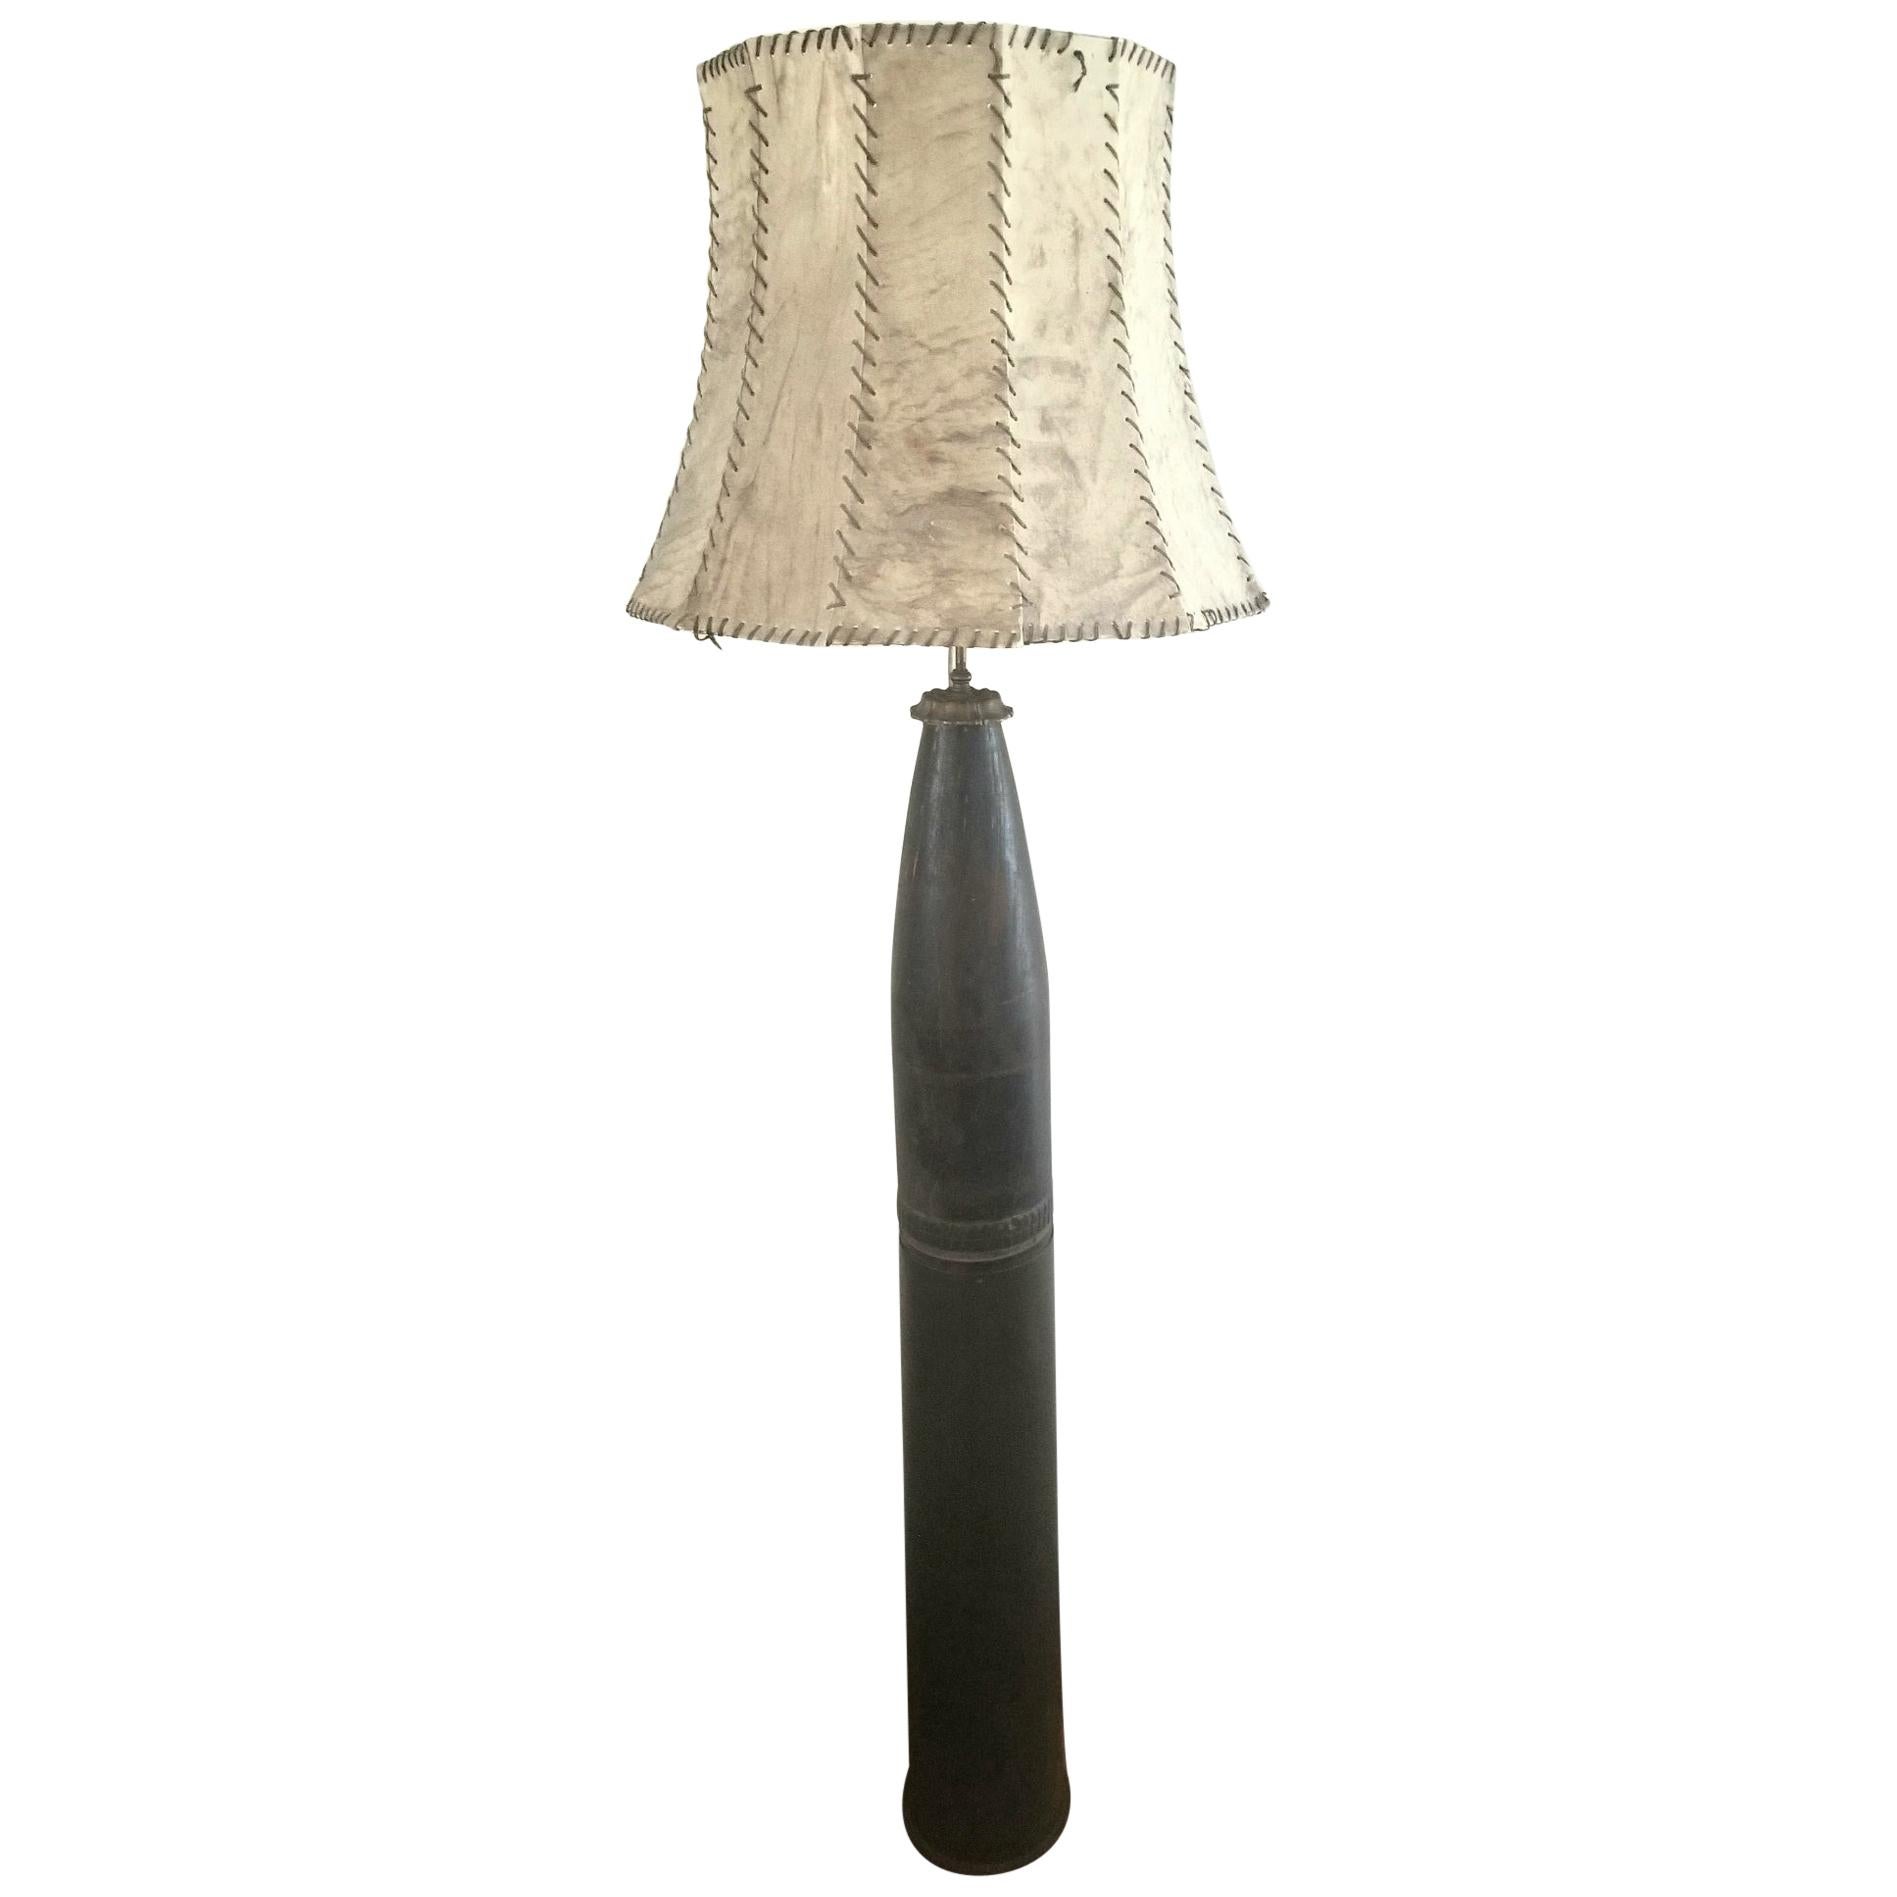  Arts and Craft Floor Lamp  For Sale